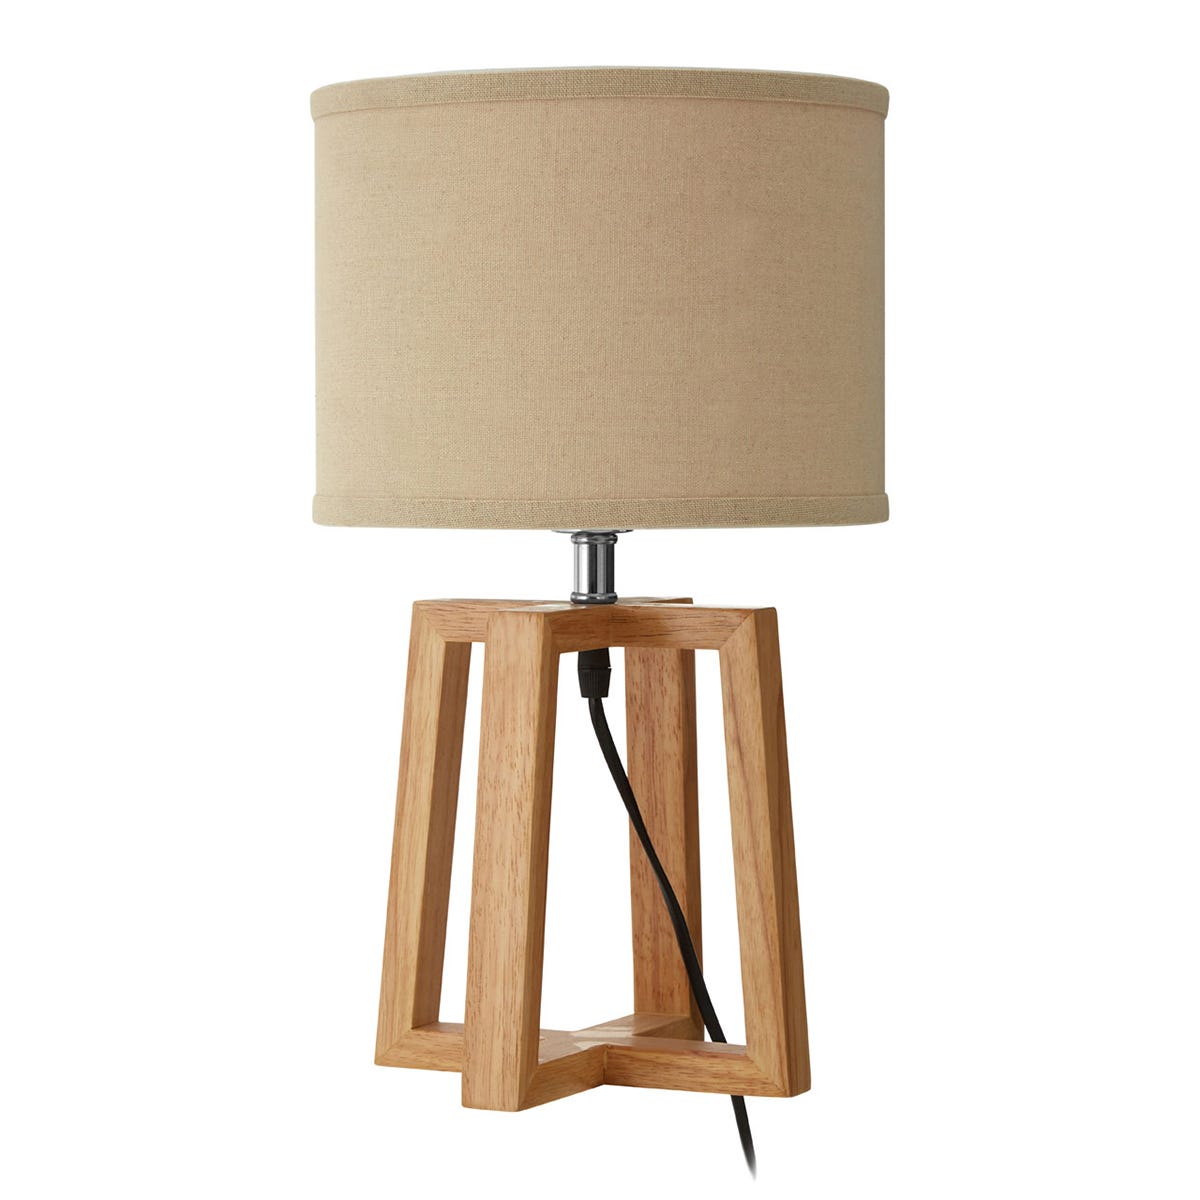 Premier Housewares Lea Table Lamp with Light Brown Fabric Shade